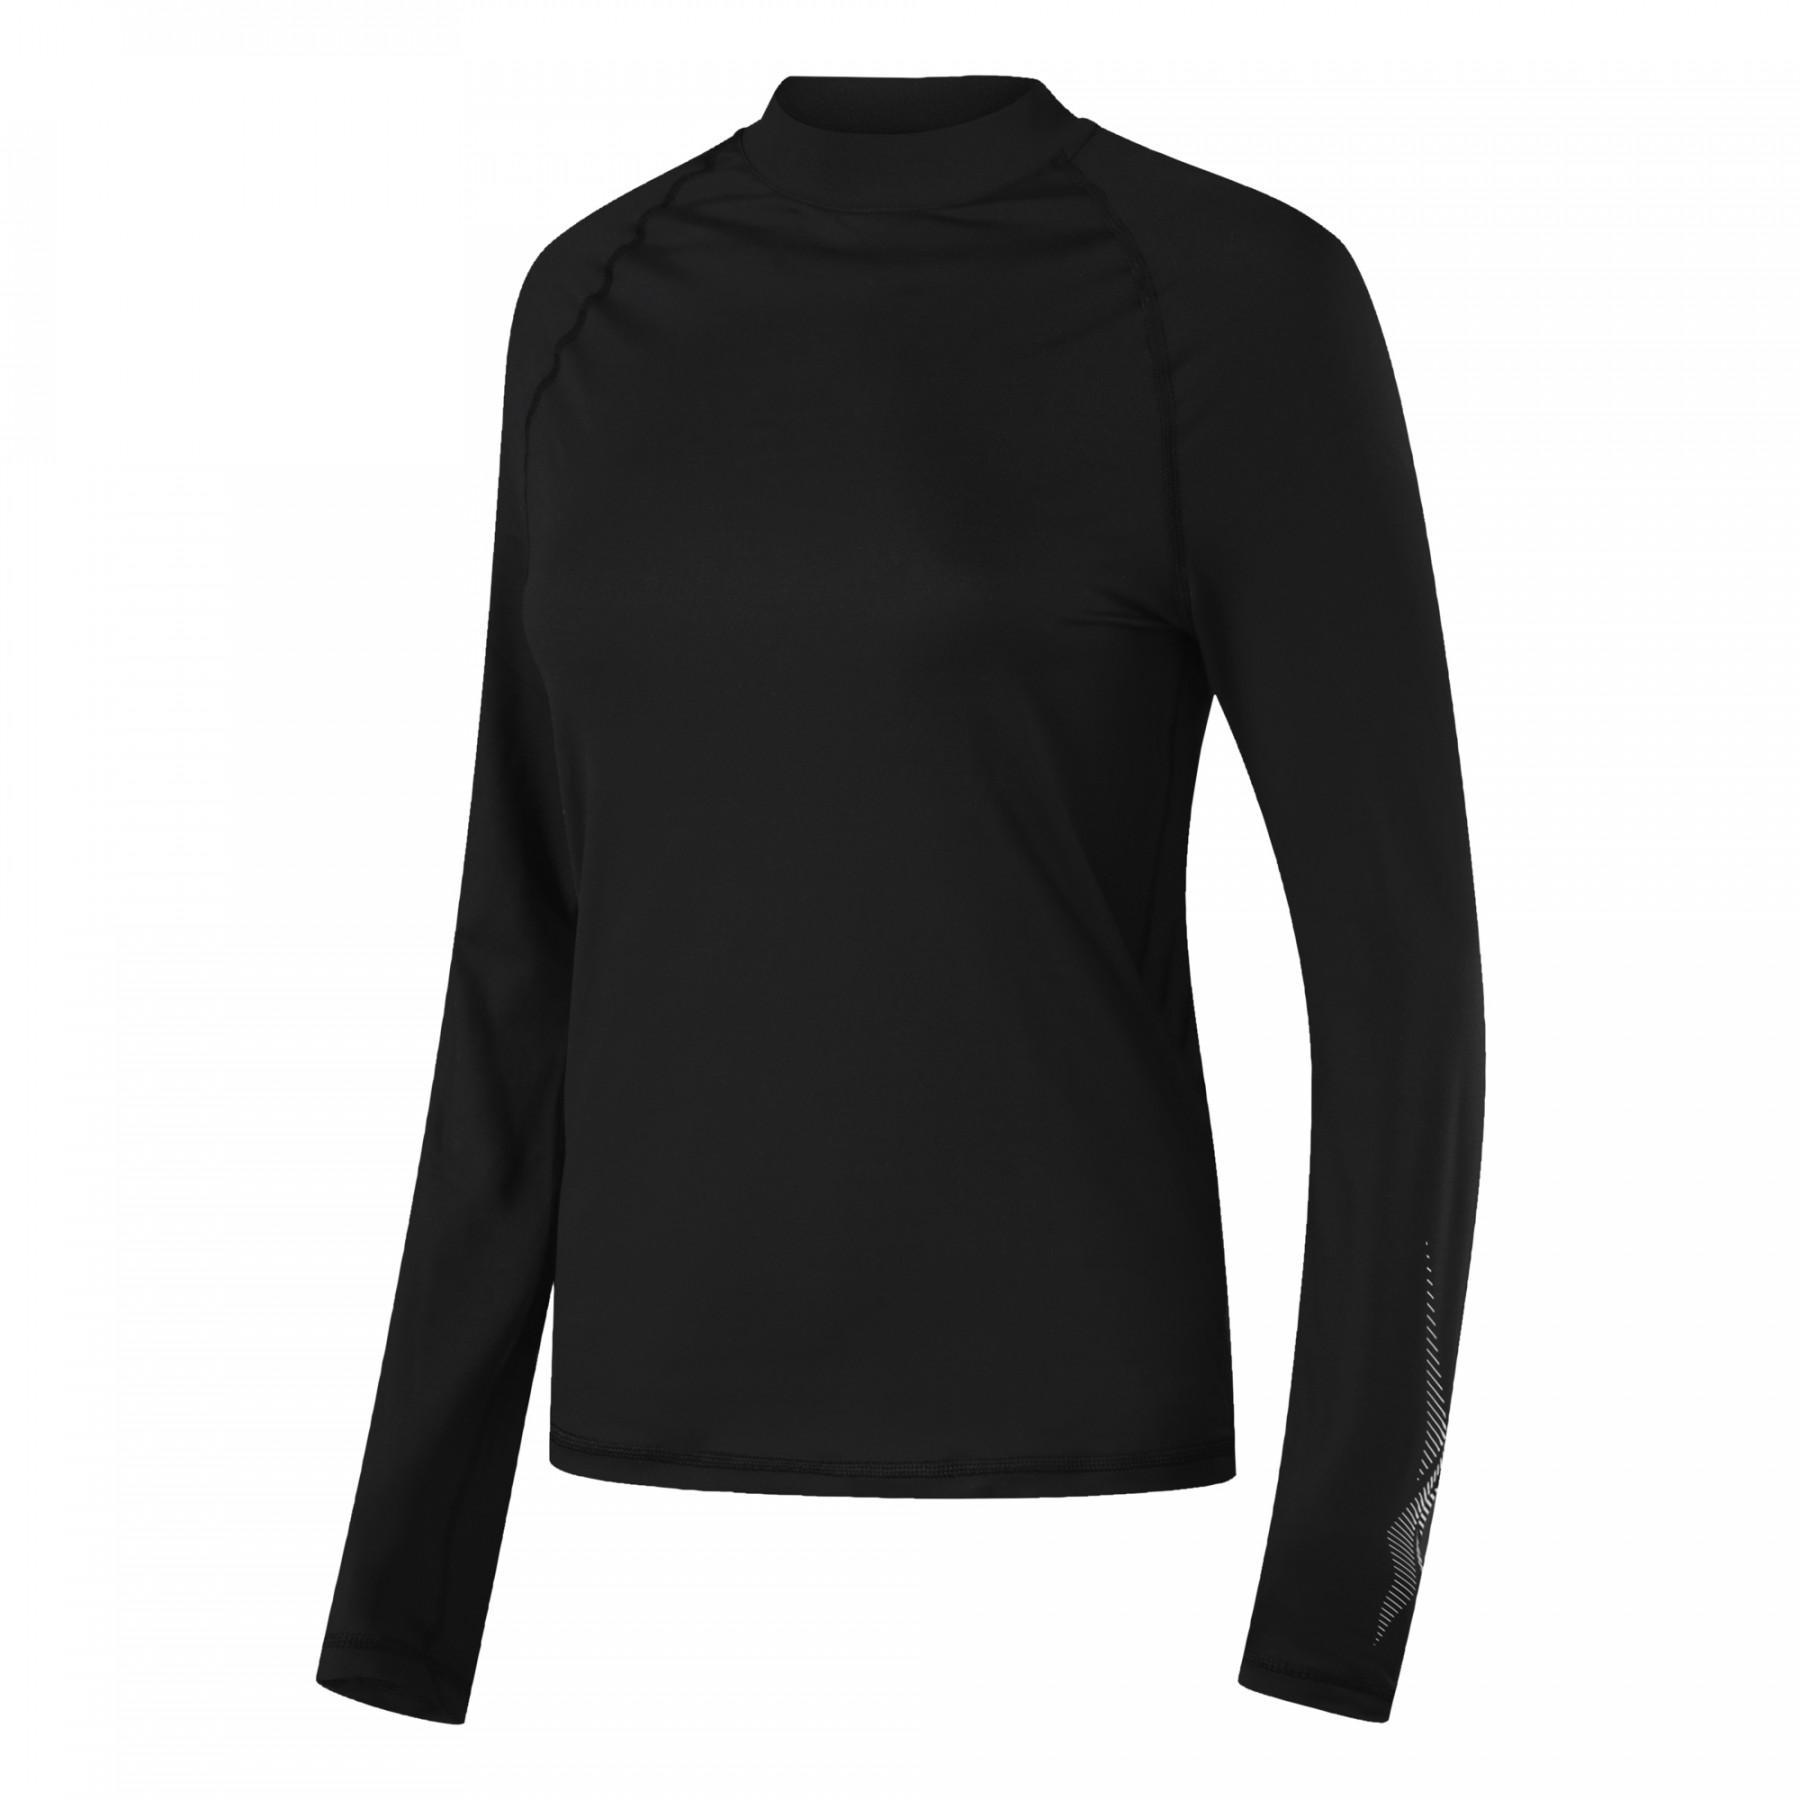 Women's T-shirt Reebok Thermowarm Touch Graphic Base Layer